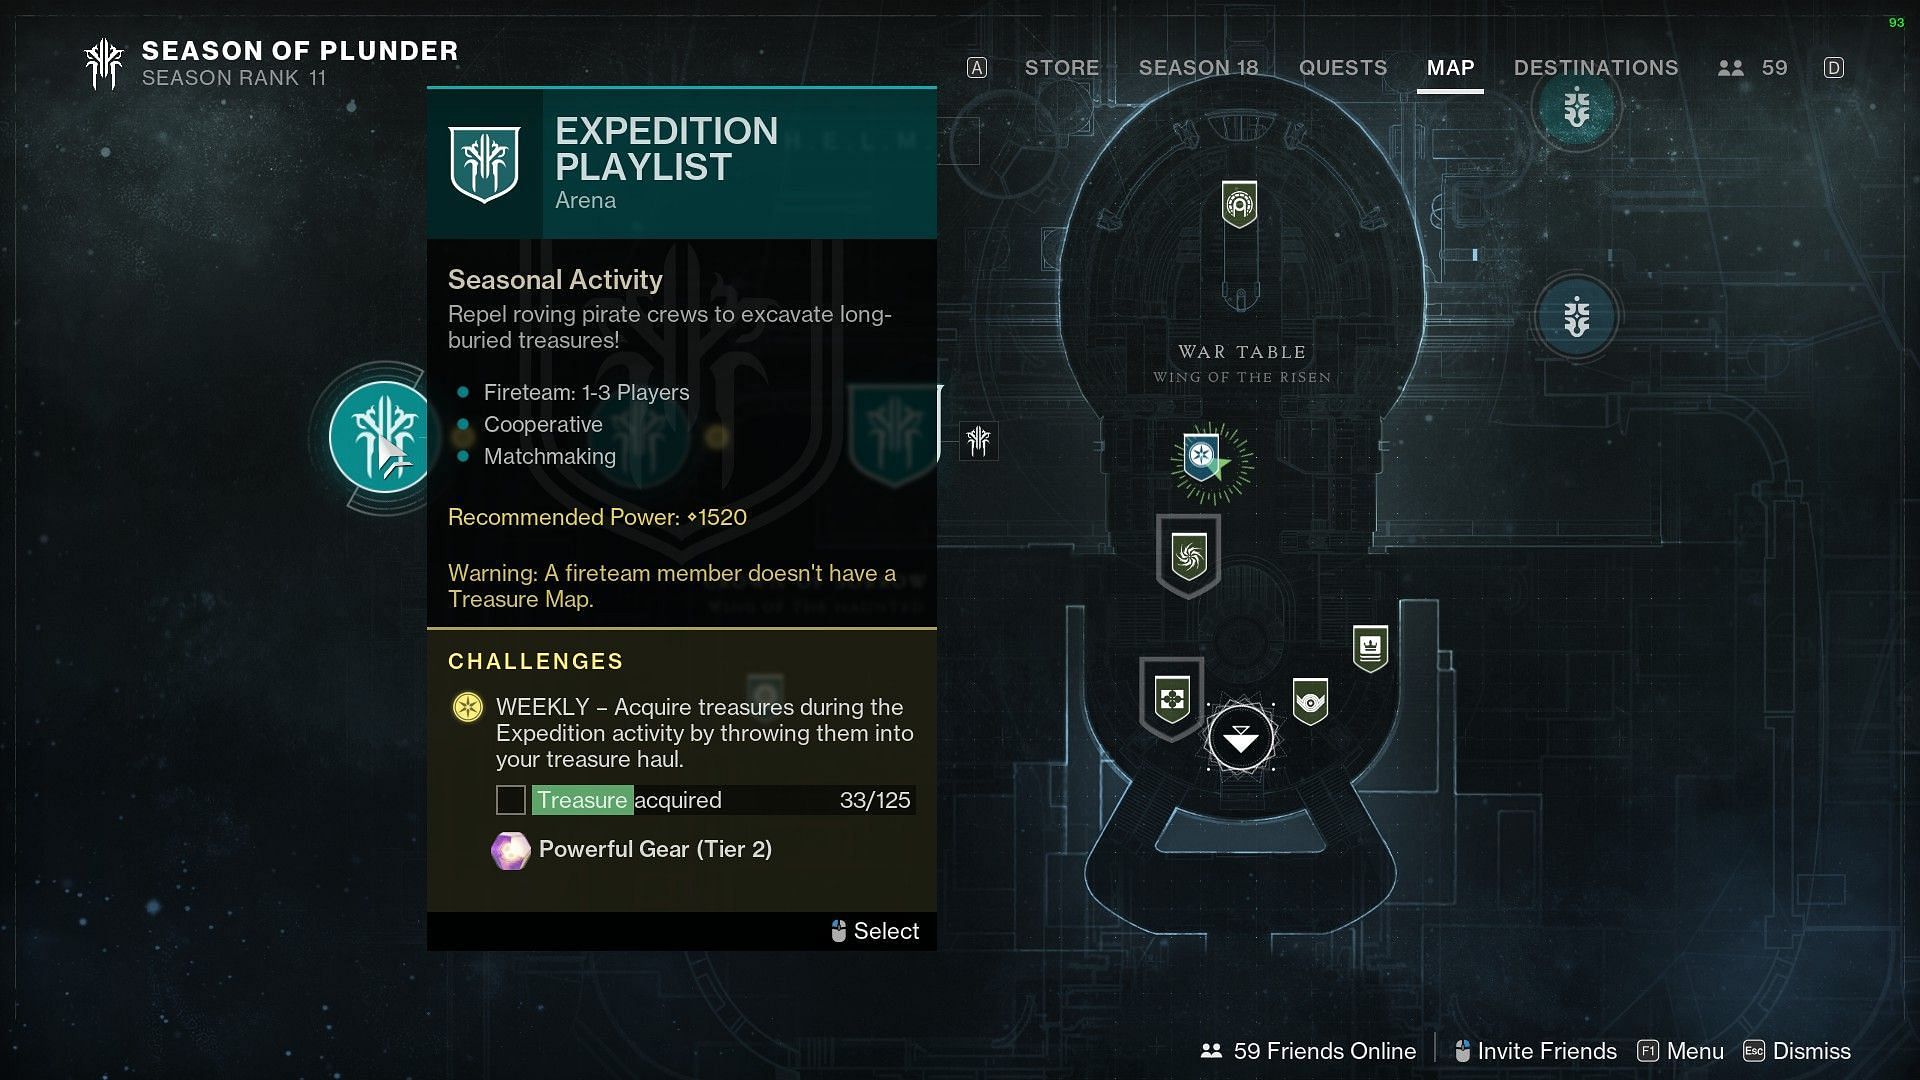 Expedition playlist in Season of Plunder (Image via Destiny 2)